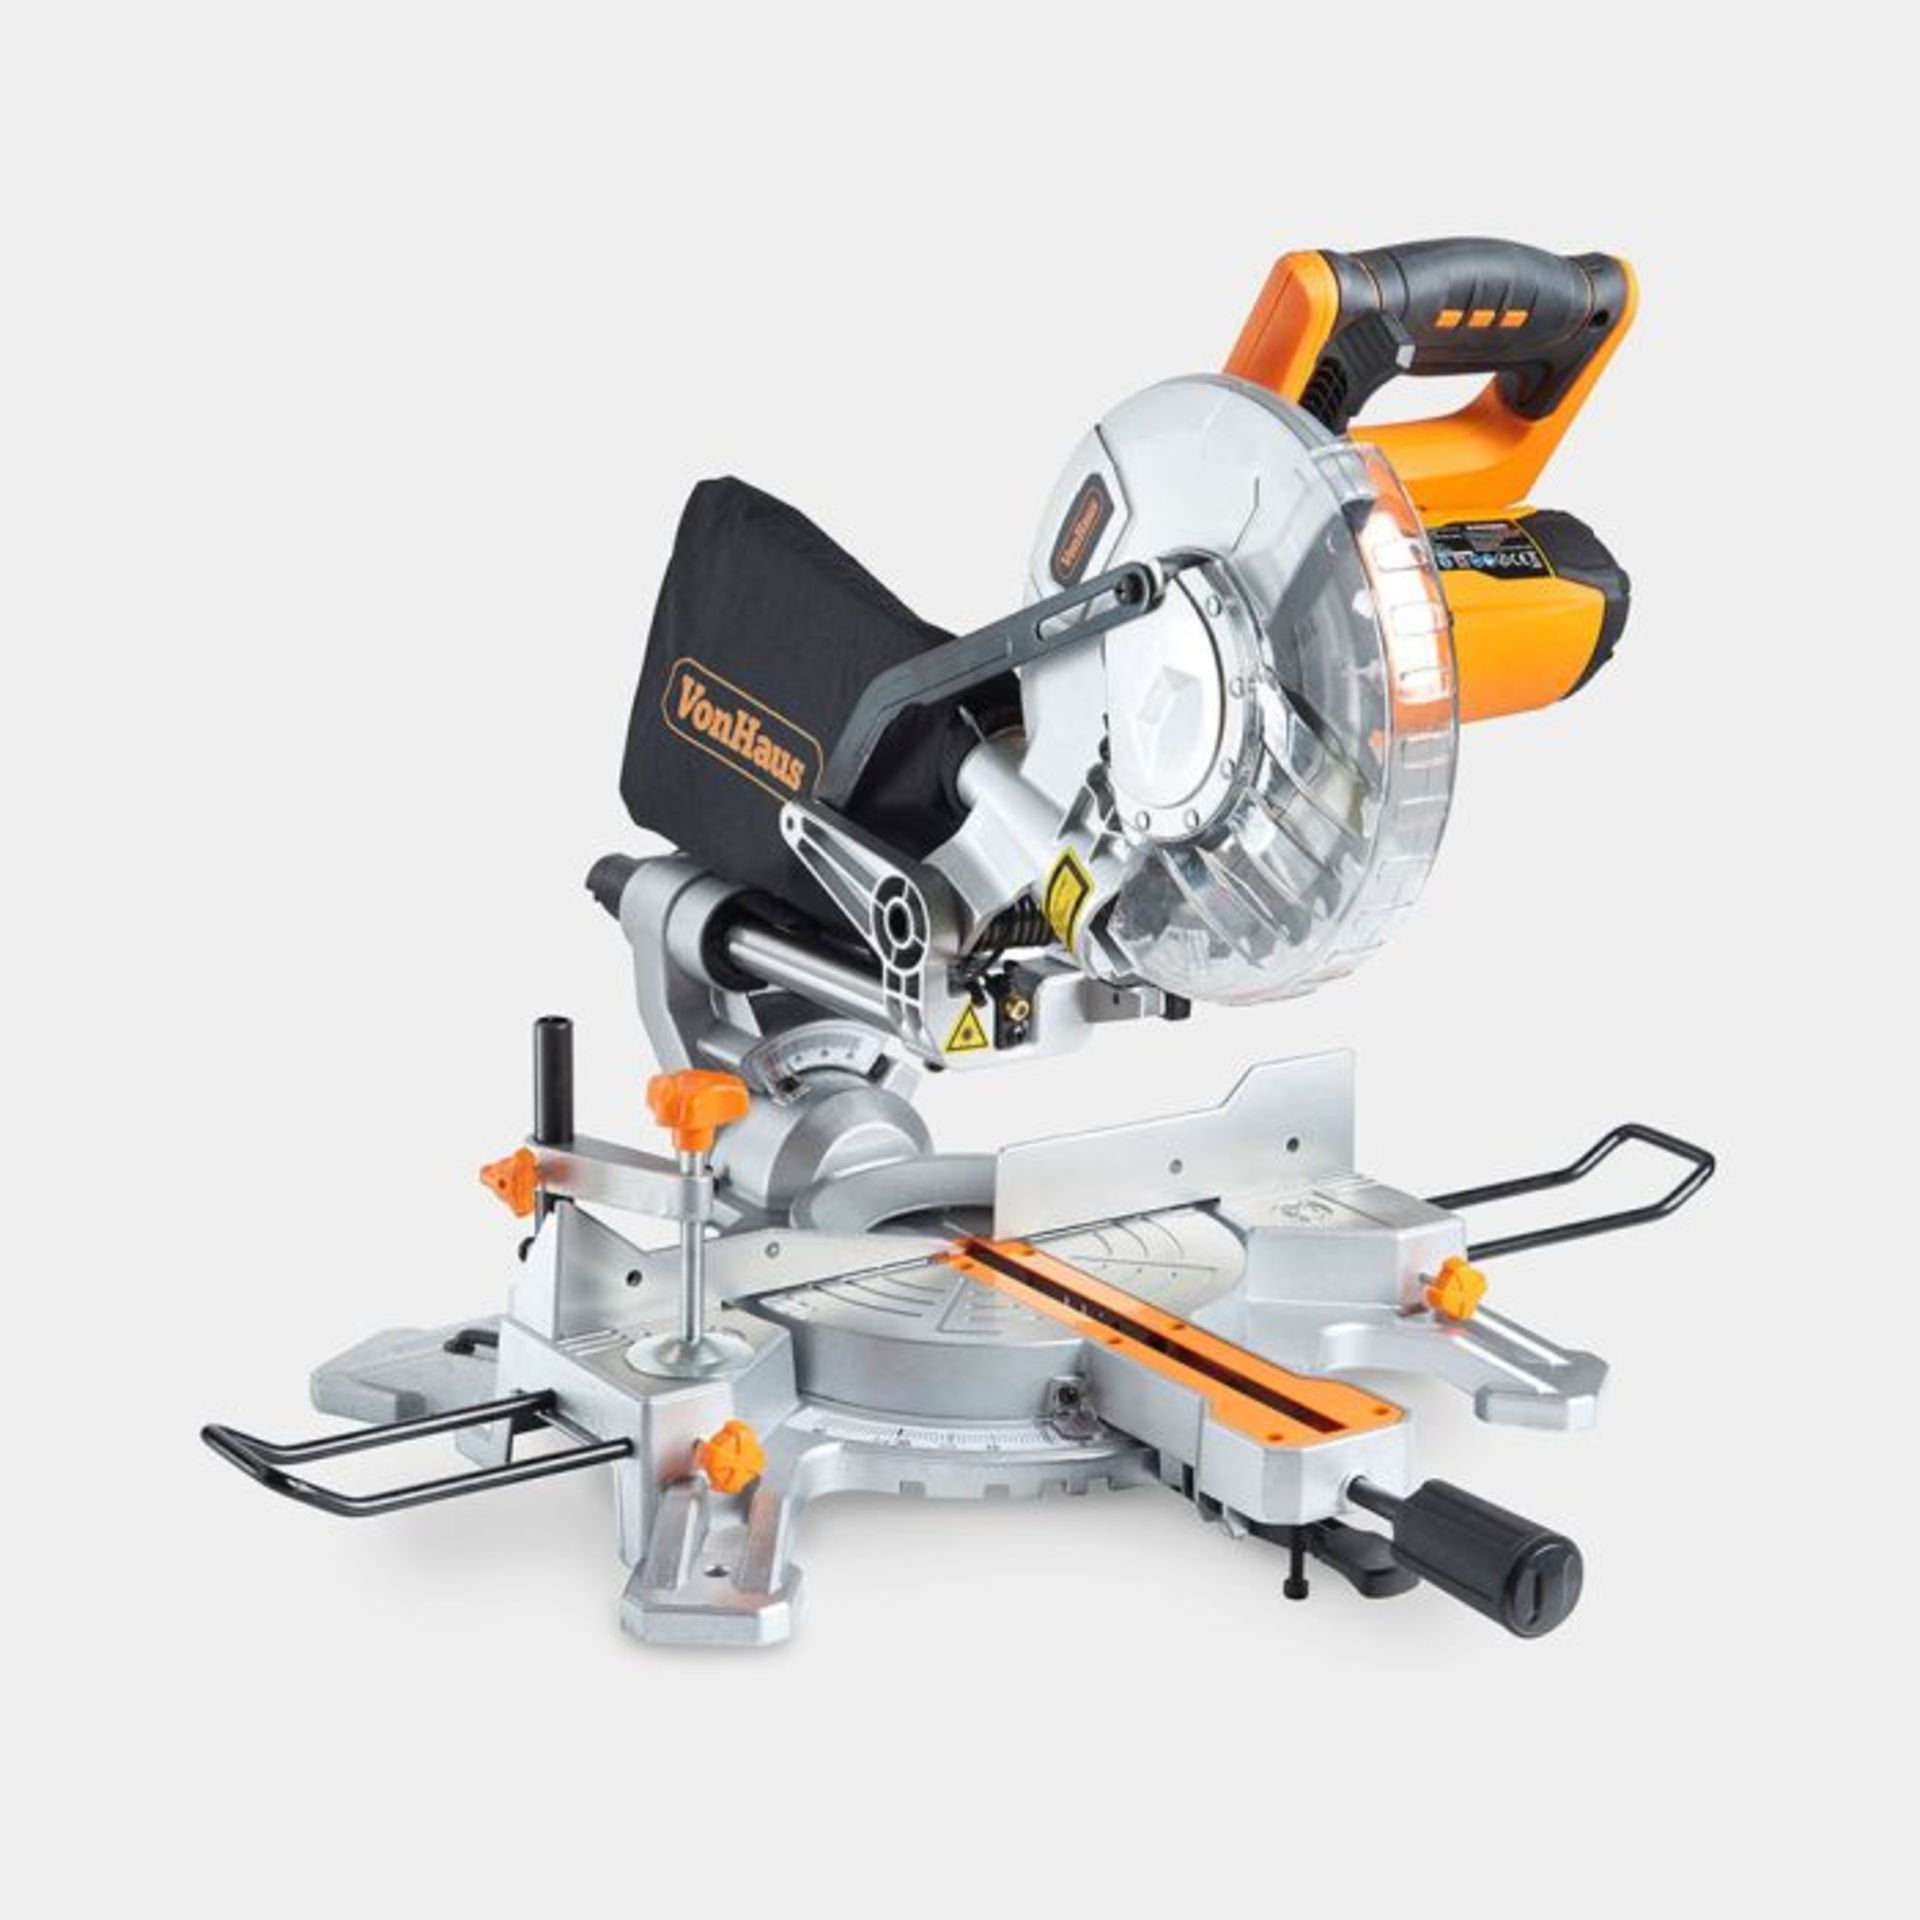 1500W Sliding Mitre Saw. - ER34. Powerful, reliable and highly versatile the 1500W sliding mitre saw